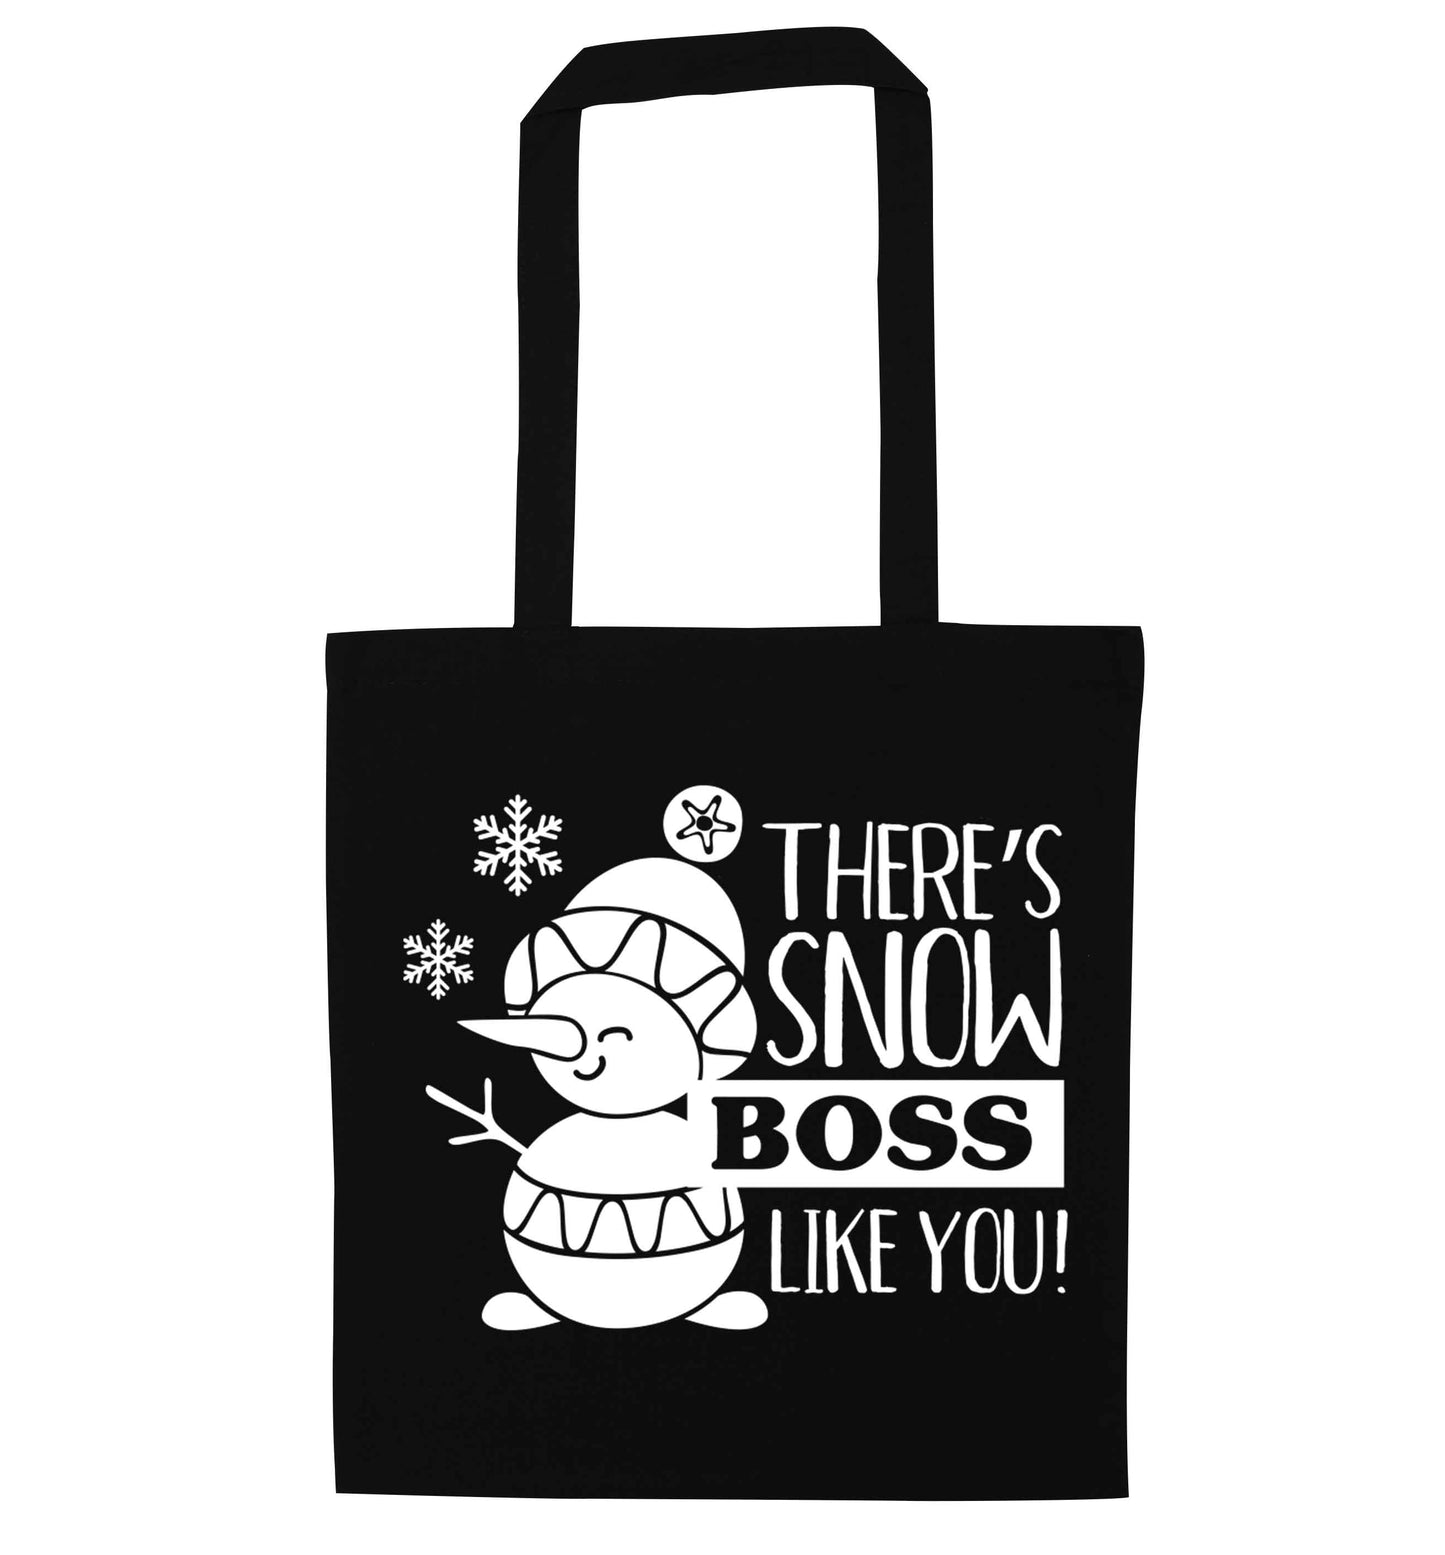 There's snow boss like you black tote bag